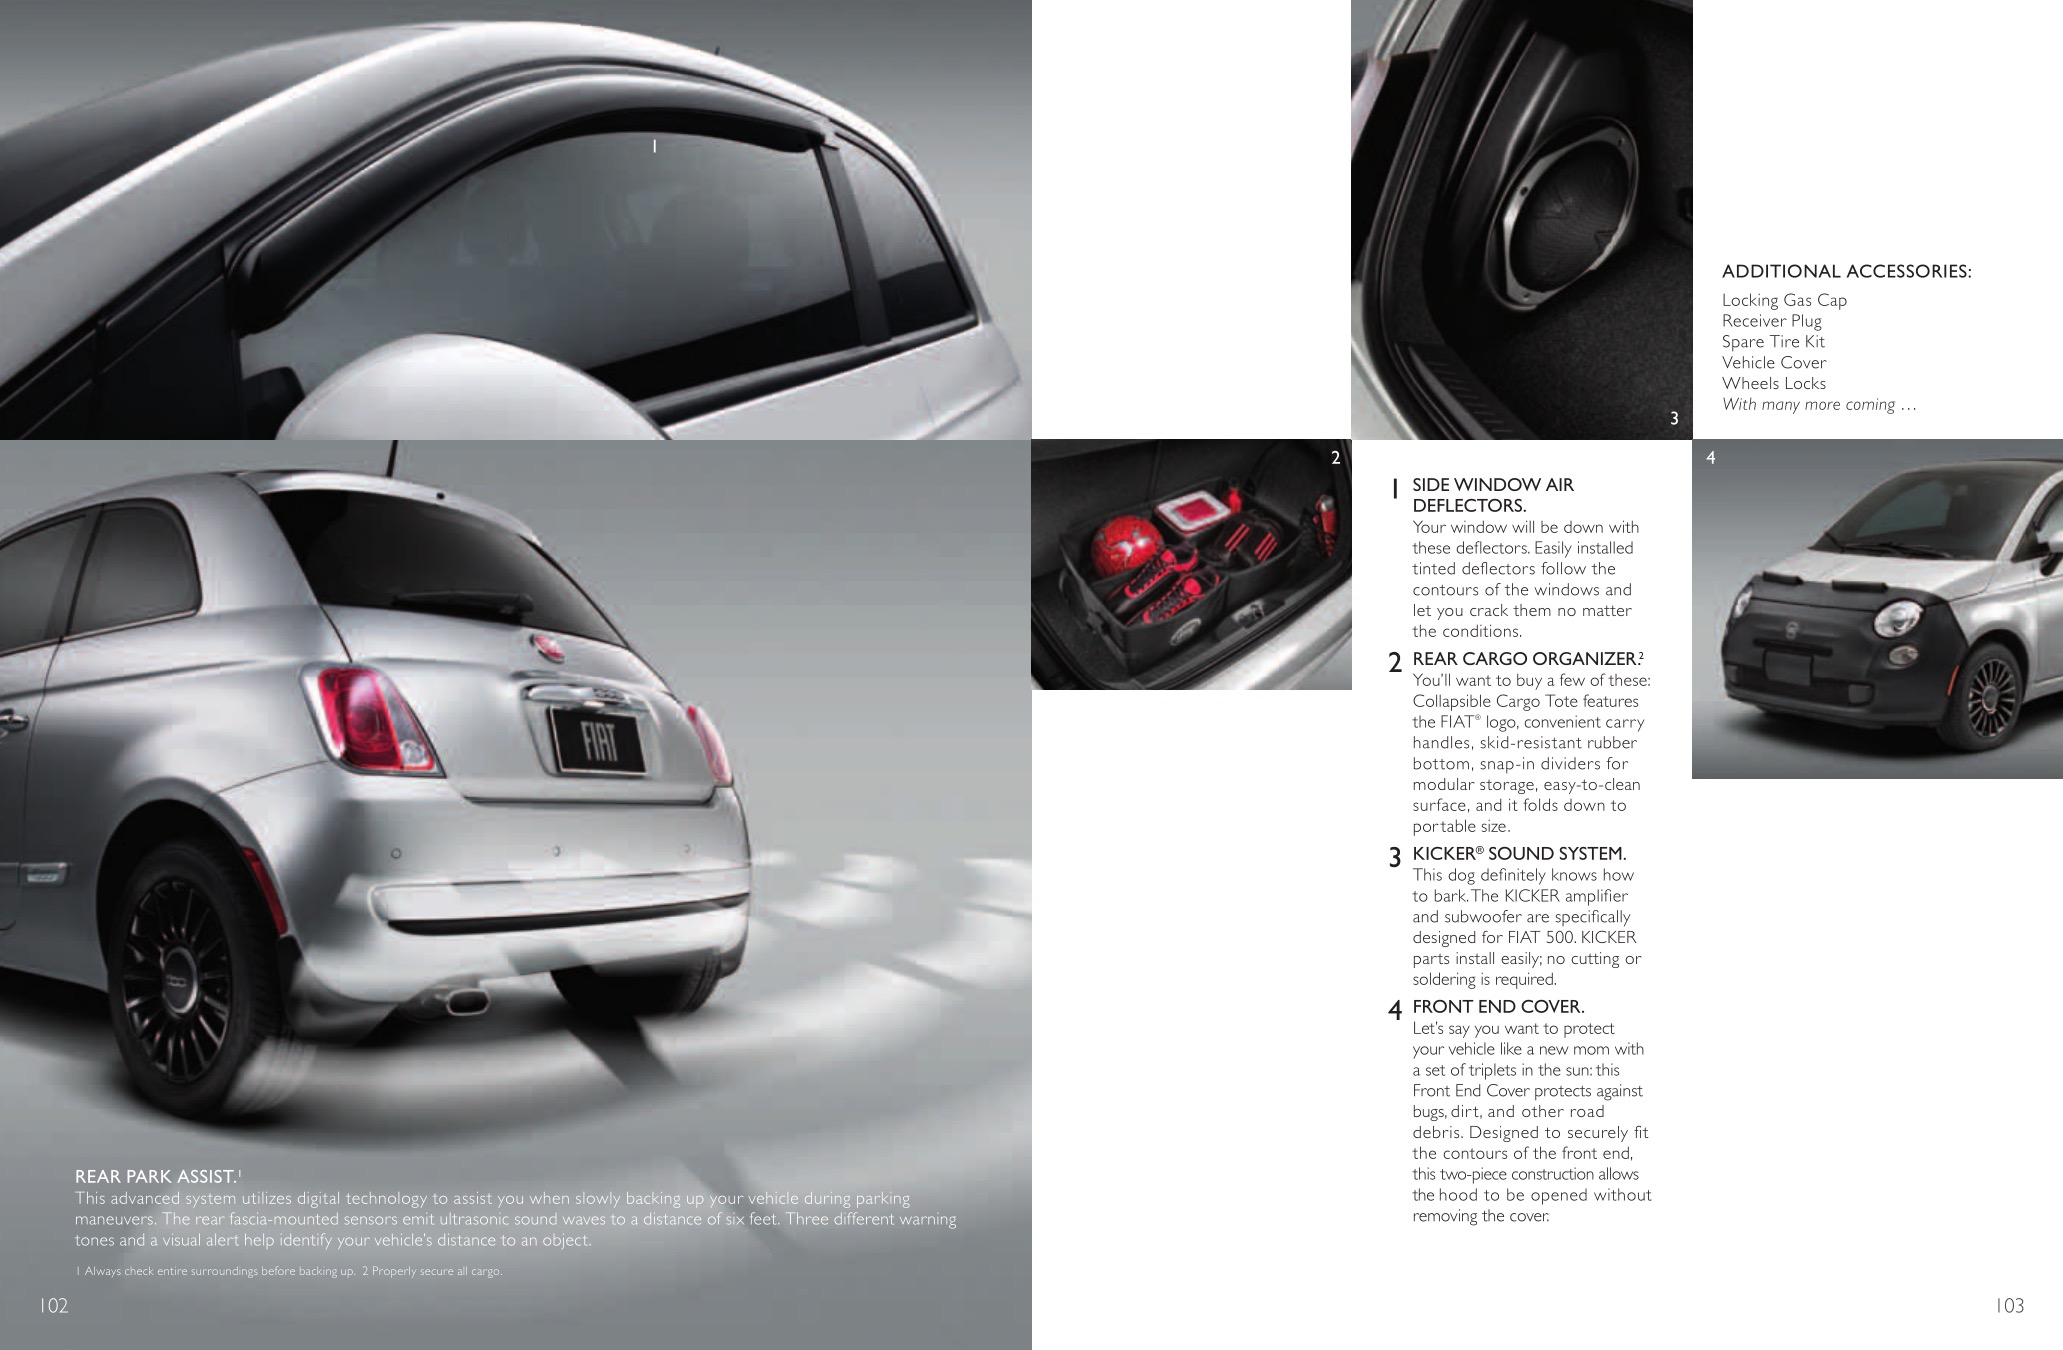 2012 Fiat 500 Brochure Page 3